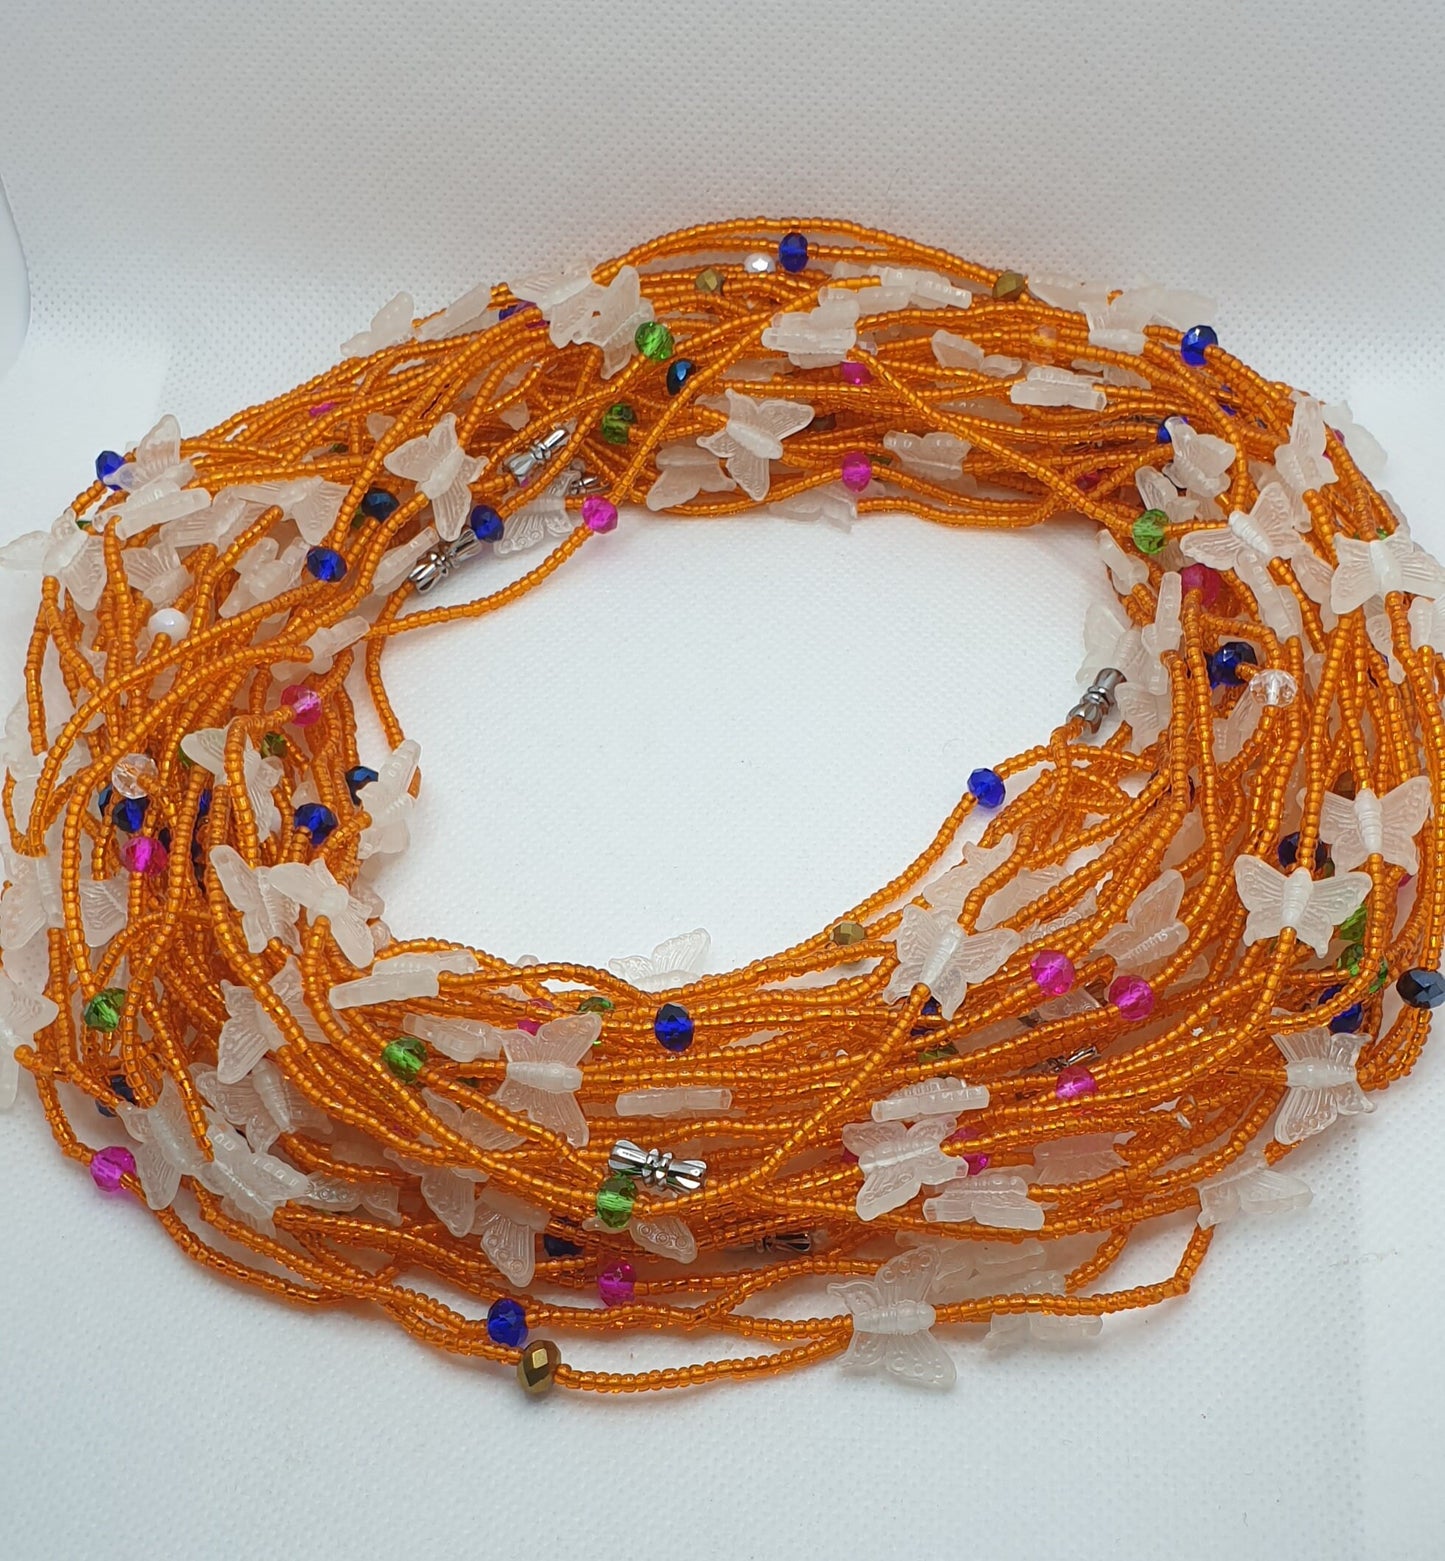 Orange with Butterfly Glow waist beads| Belly Chain | weight Control |African Waist beads|Nigerian Beads|On Sale Waist Beads| Weight Tracker